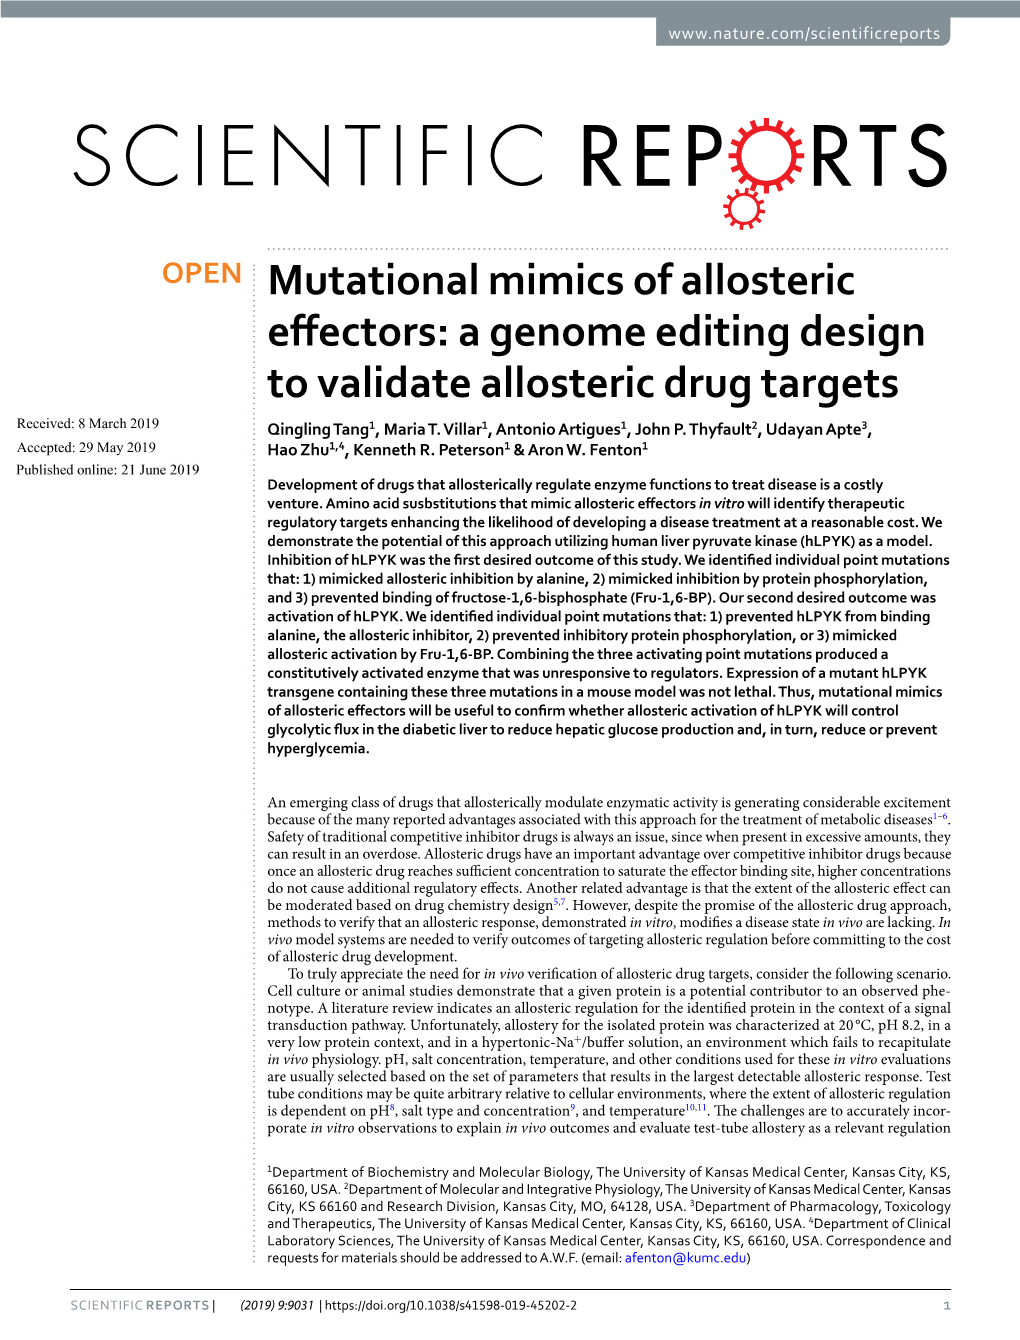 A Genome Editing Design to Validate Allosteric Drug Targets Received: 8 March 2019 Qingling Tang1, Maria T